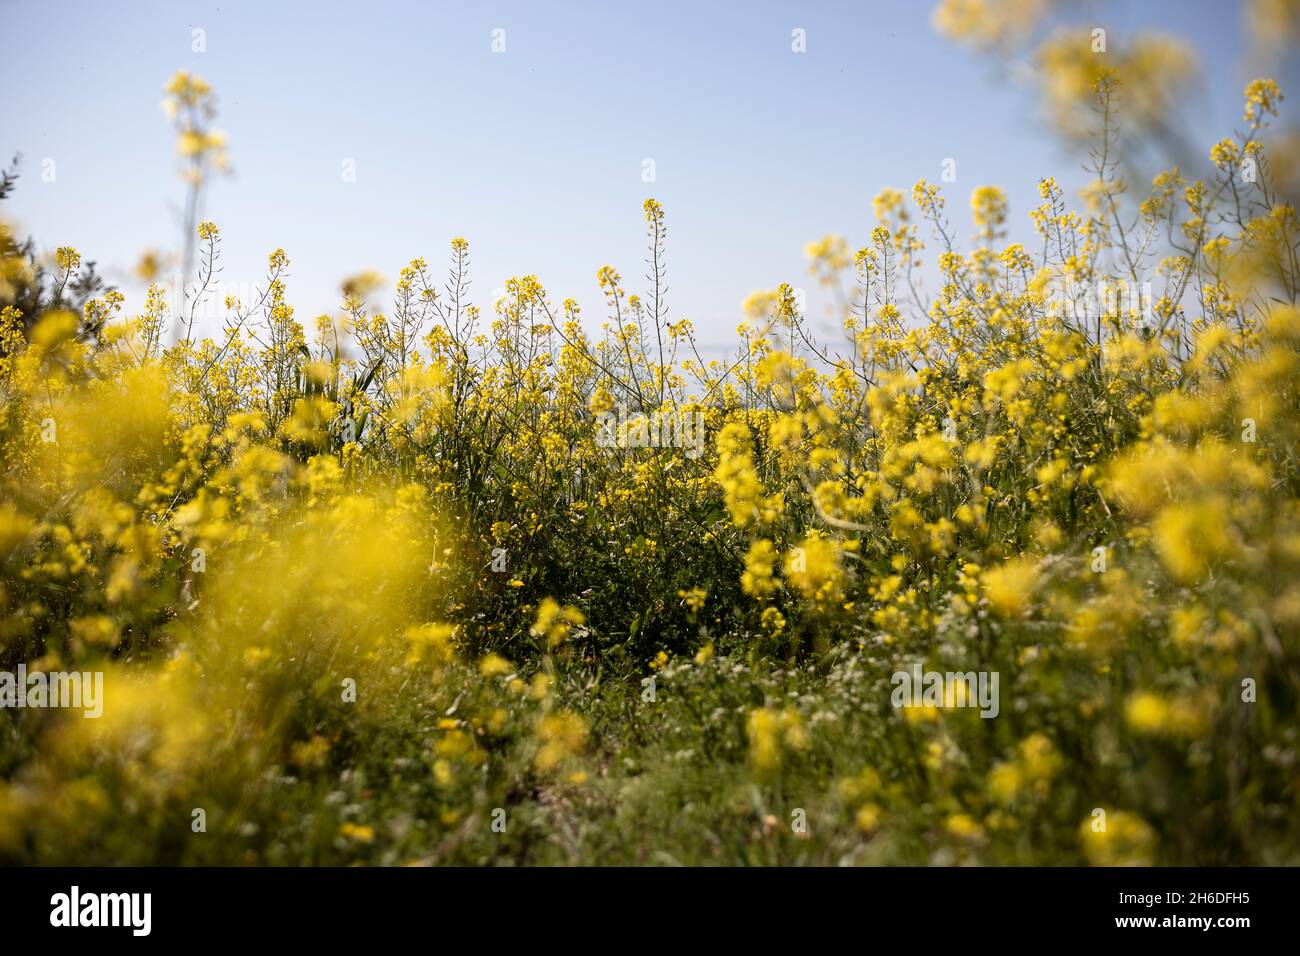 Rapeseed (Brassica napus subsp. napus) in a city park, Thessaloniki, Greece on March 27, 2021. Stock Photo